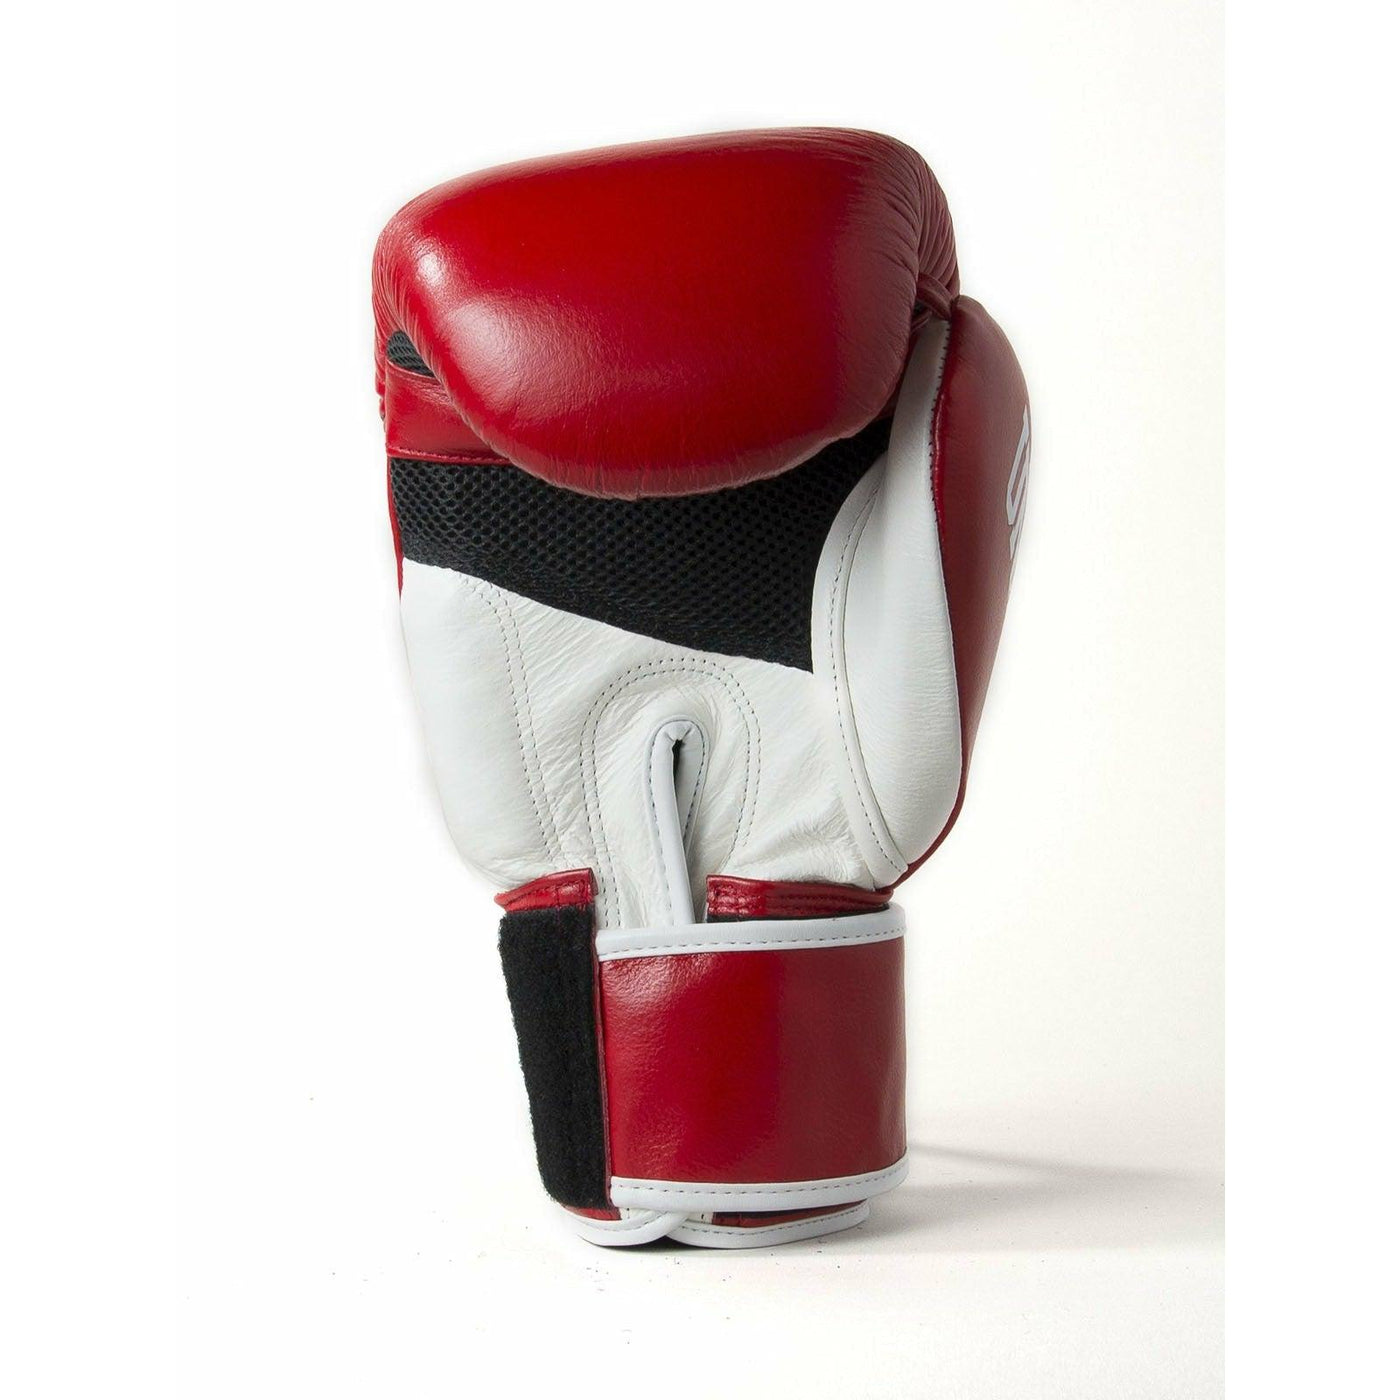 Sandee Cool-Tec Gloves - Red/White/Black - Muay Thailand